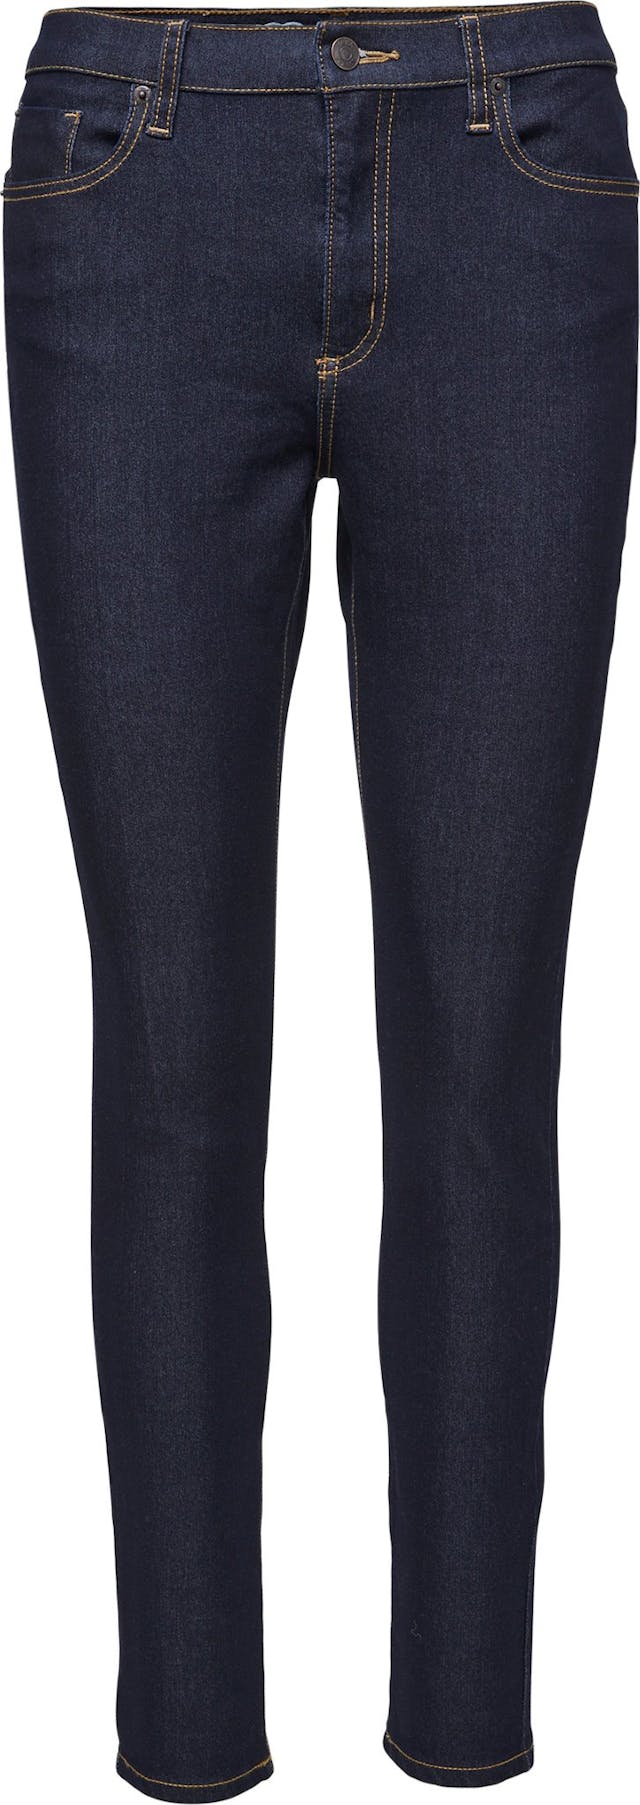 Product image for Rachel Rise Skinny Jeans 30" - Women's